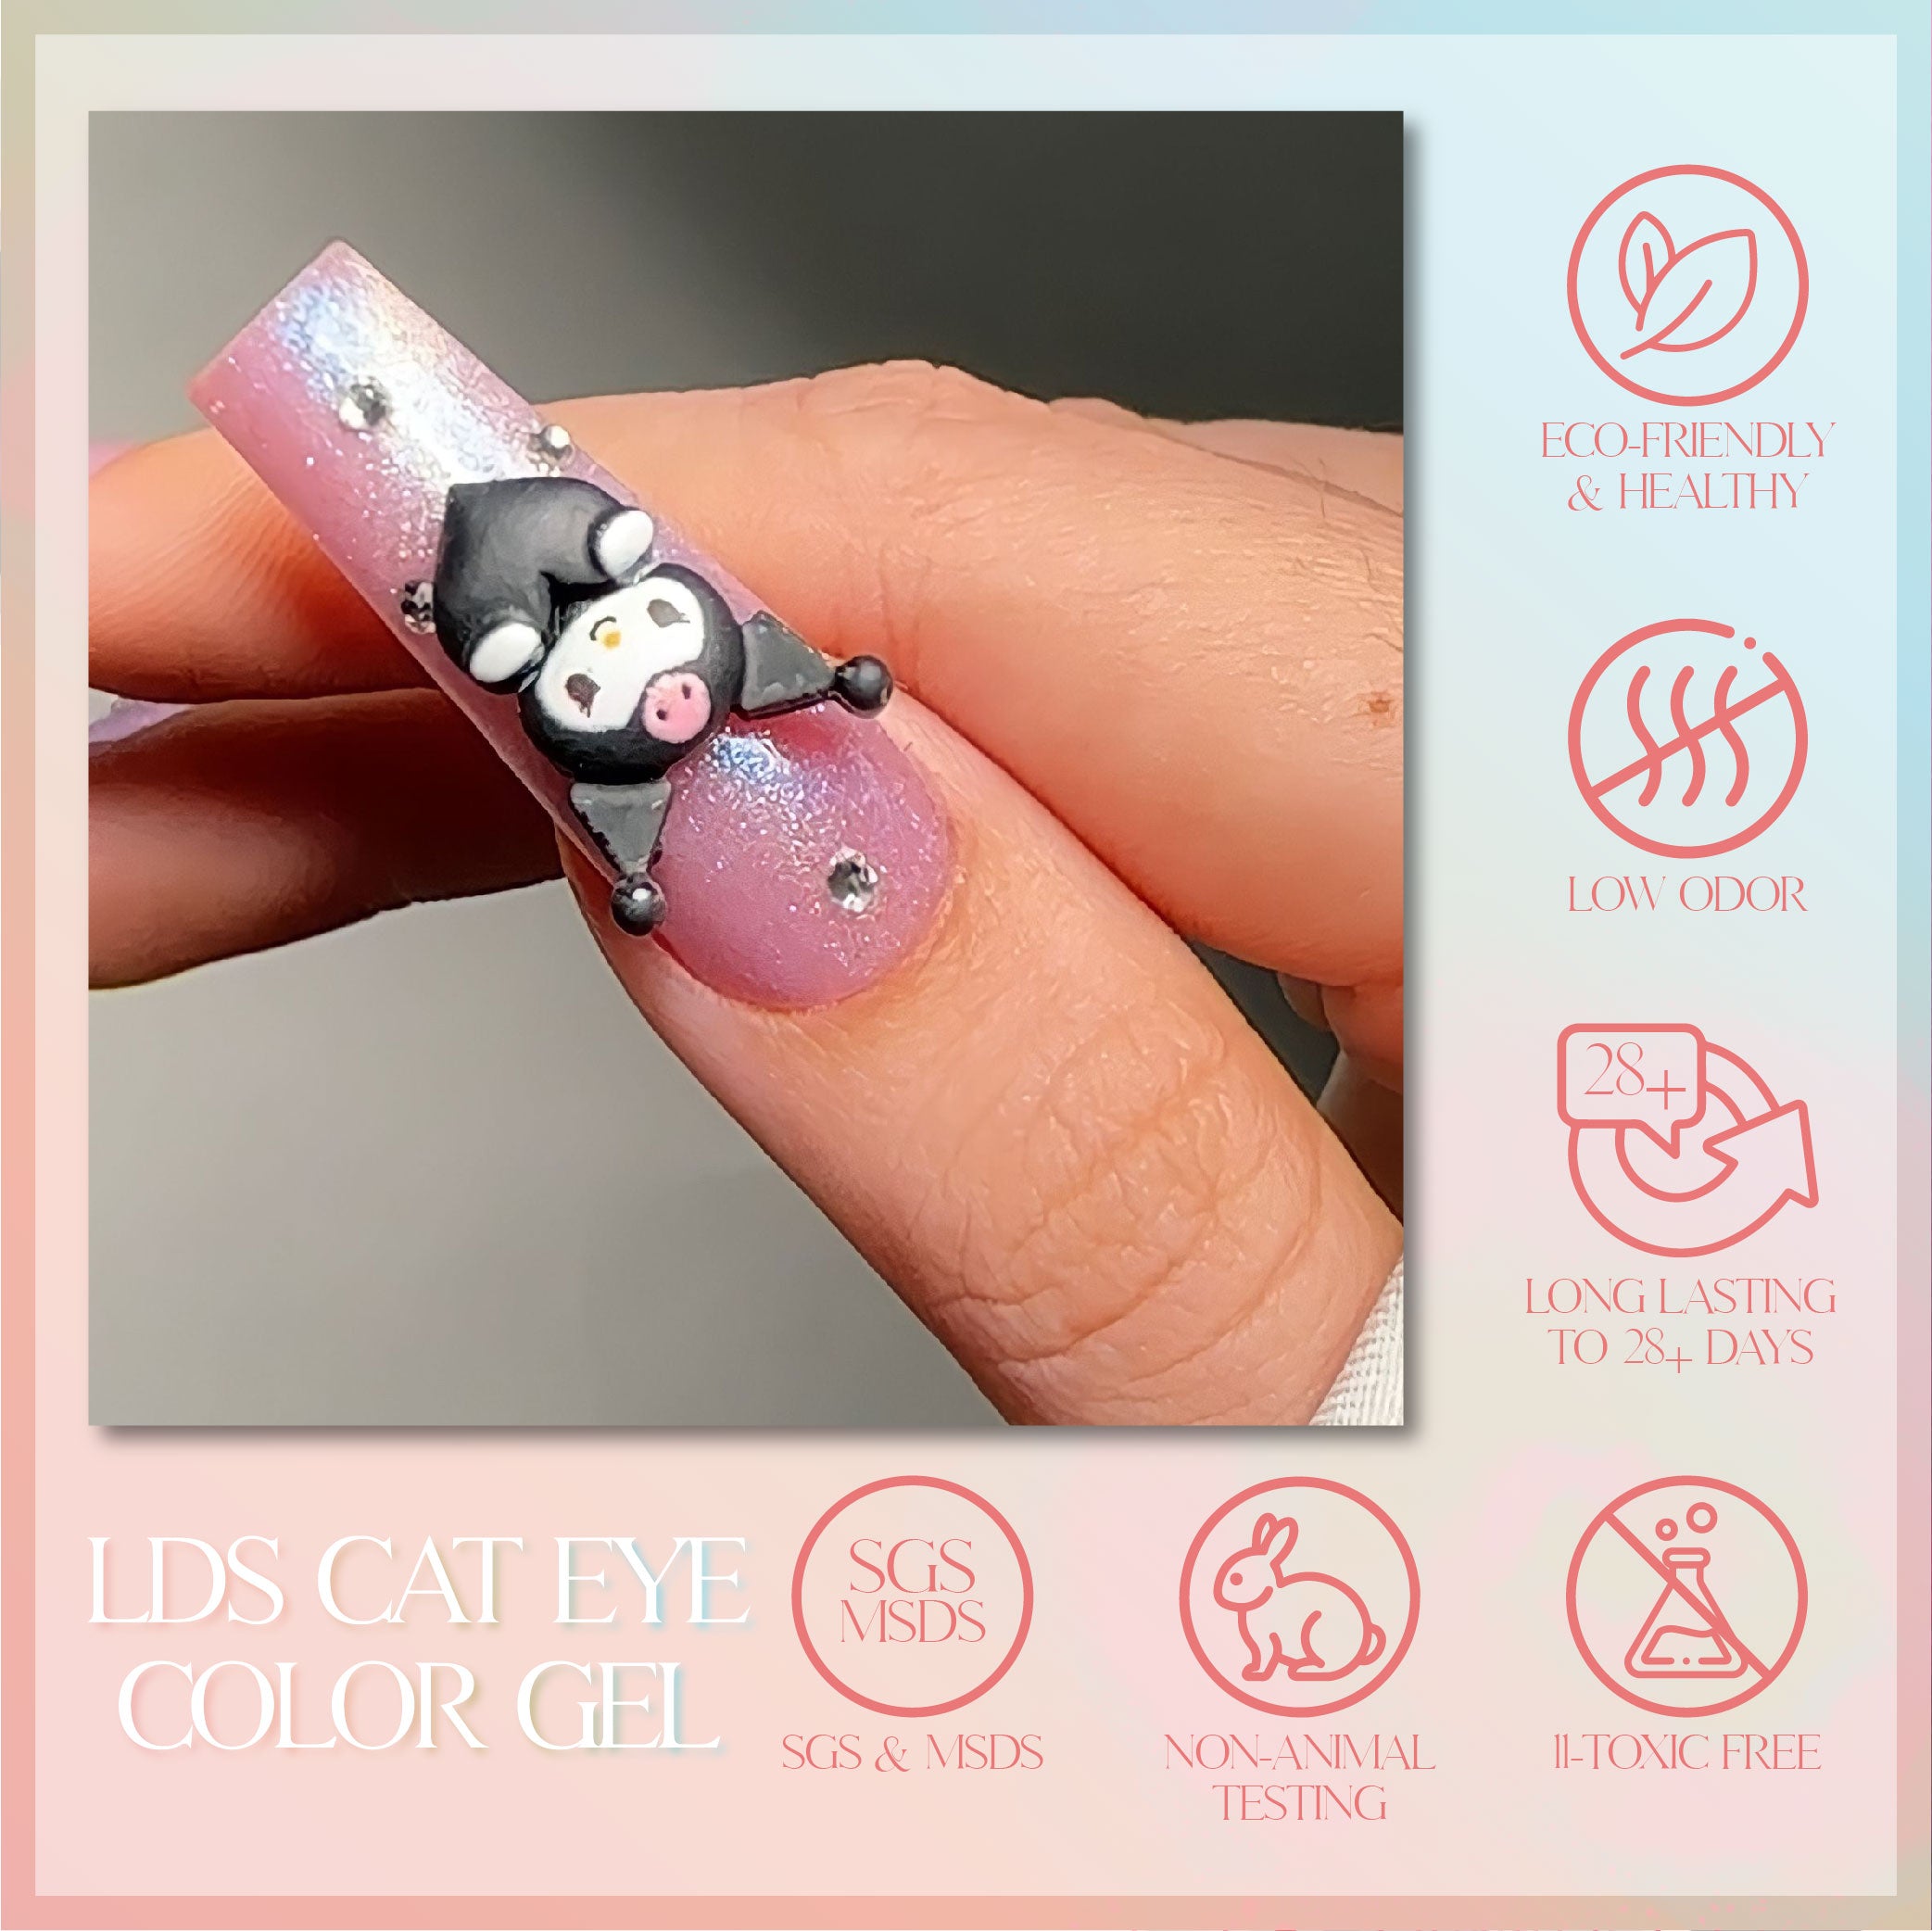 LDS Pearl CE - 13 - Pearl Veil Cat Eye Collection